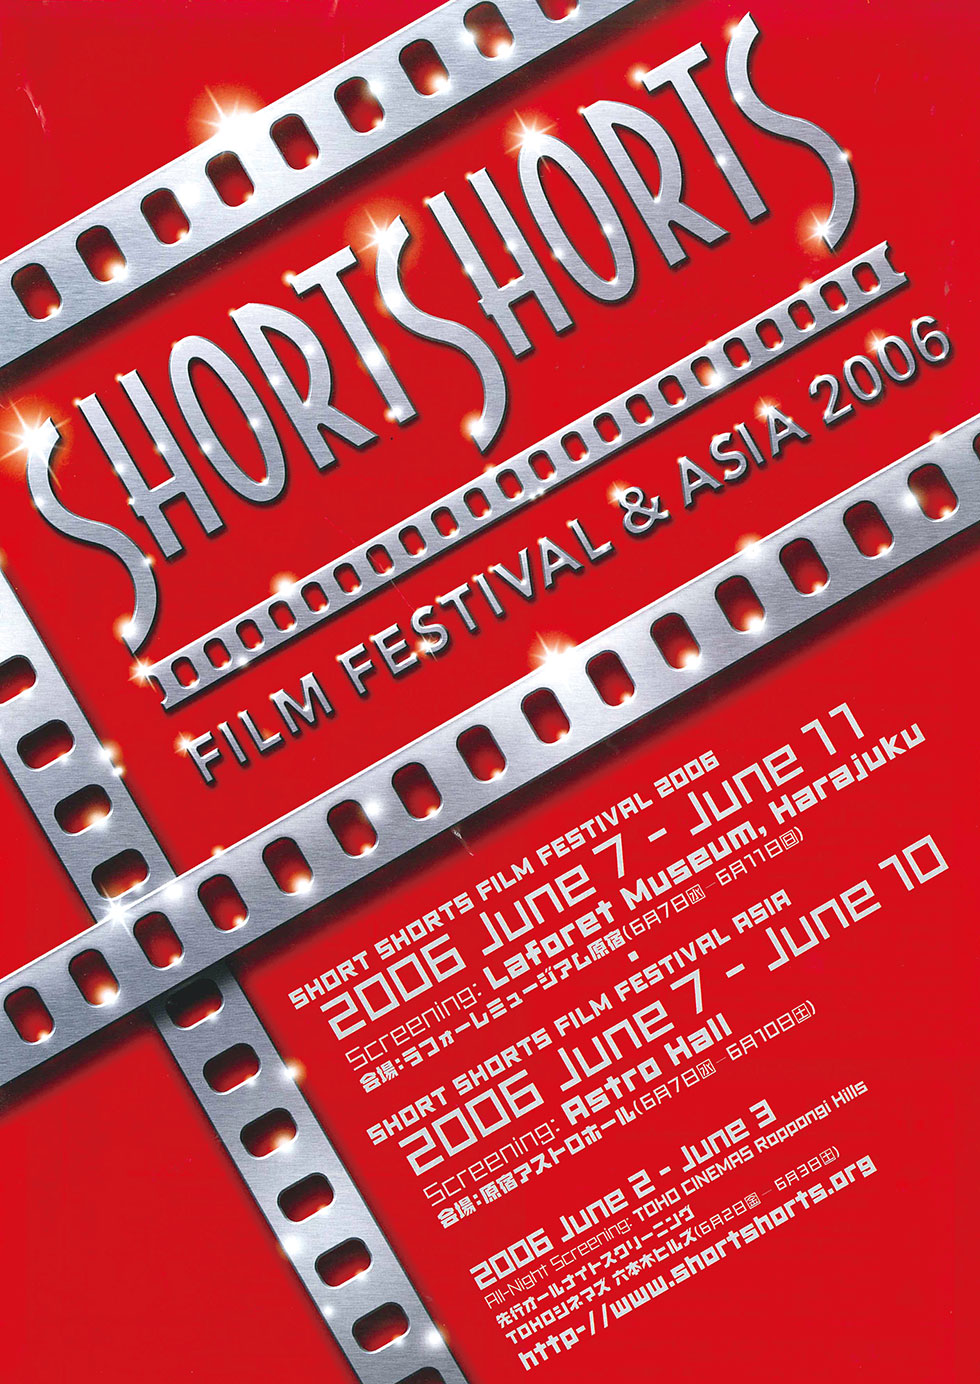 2006 poster